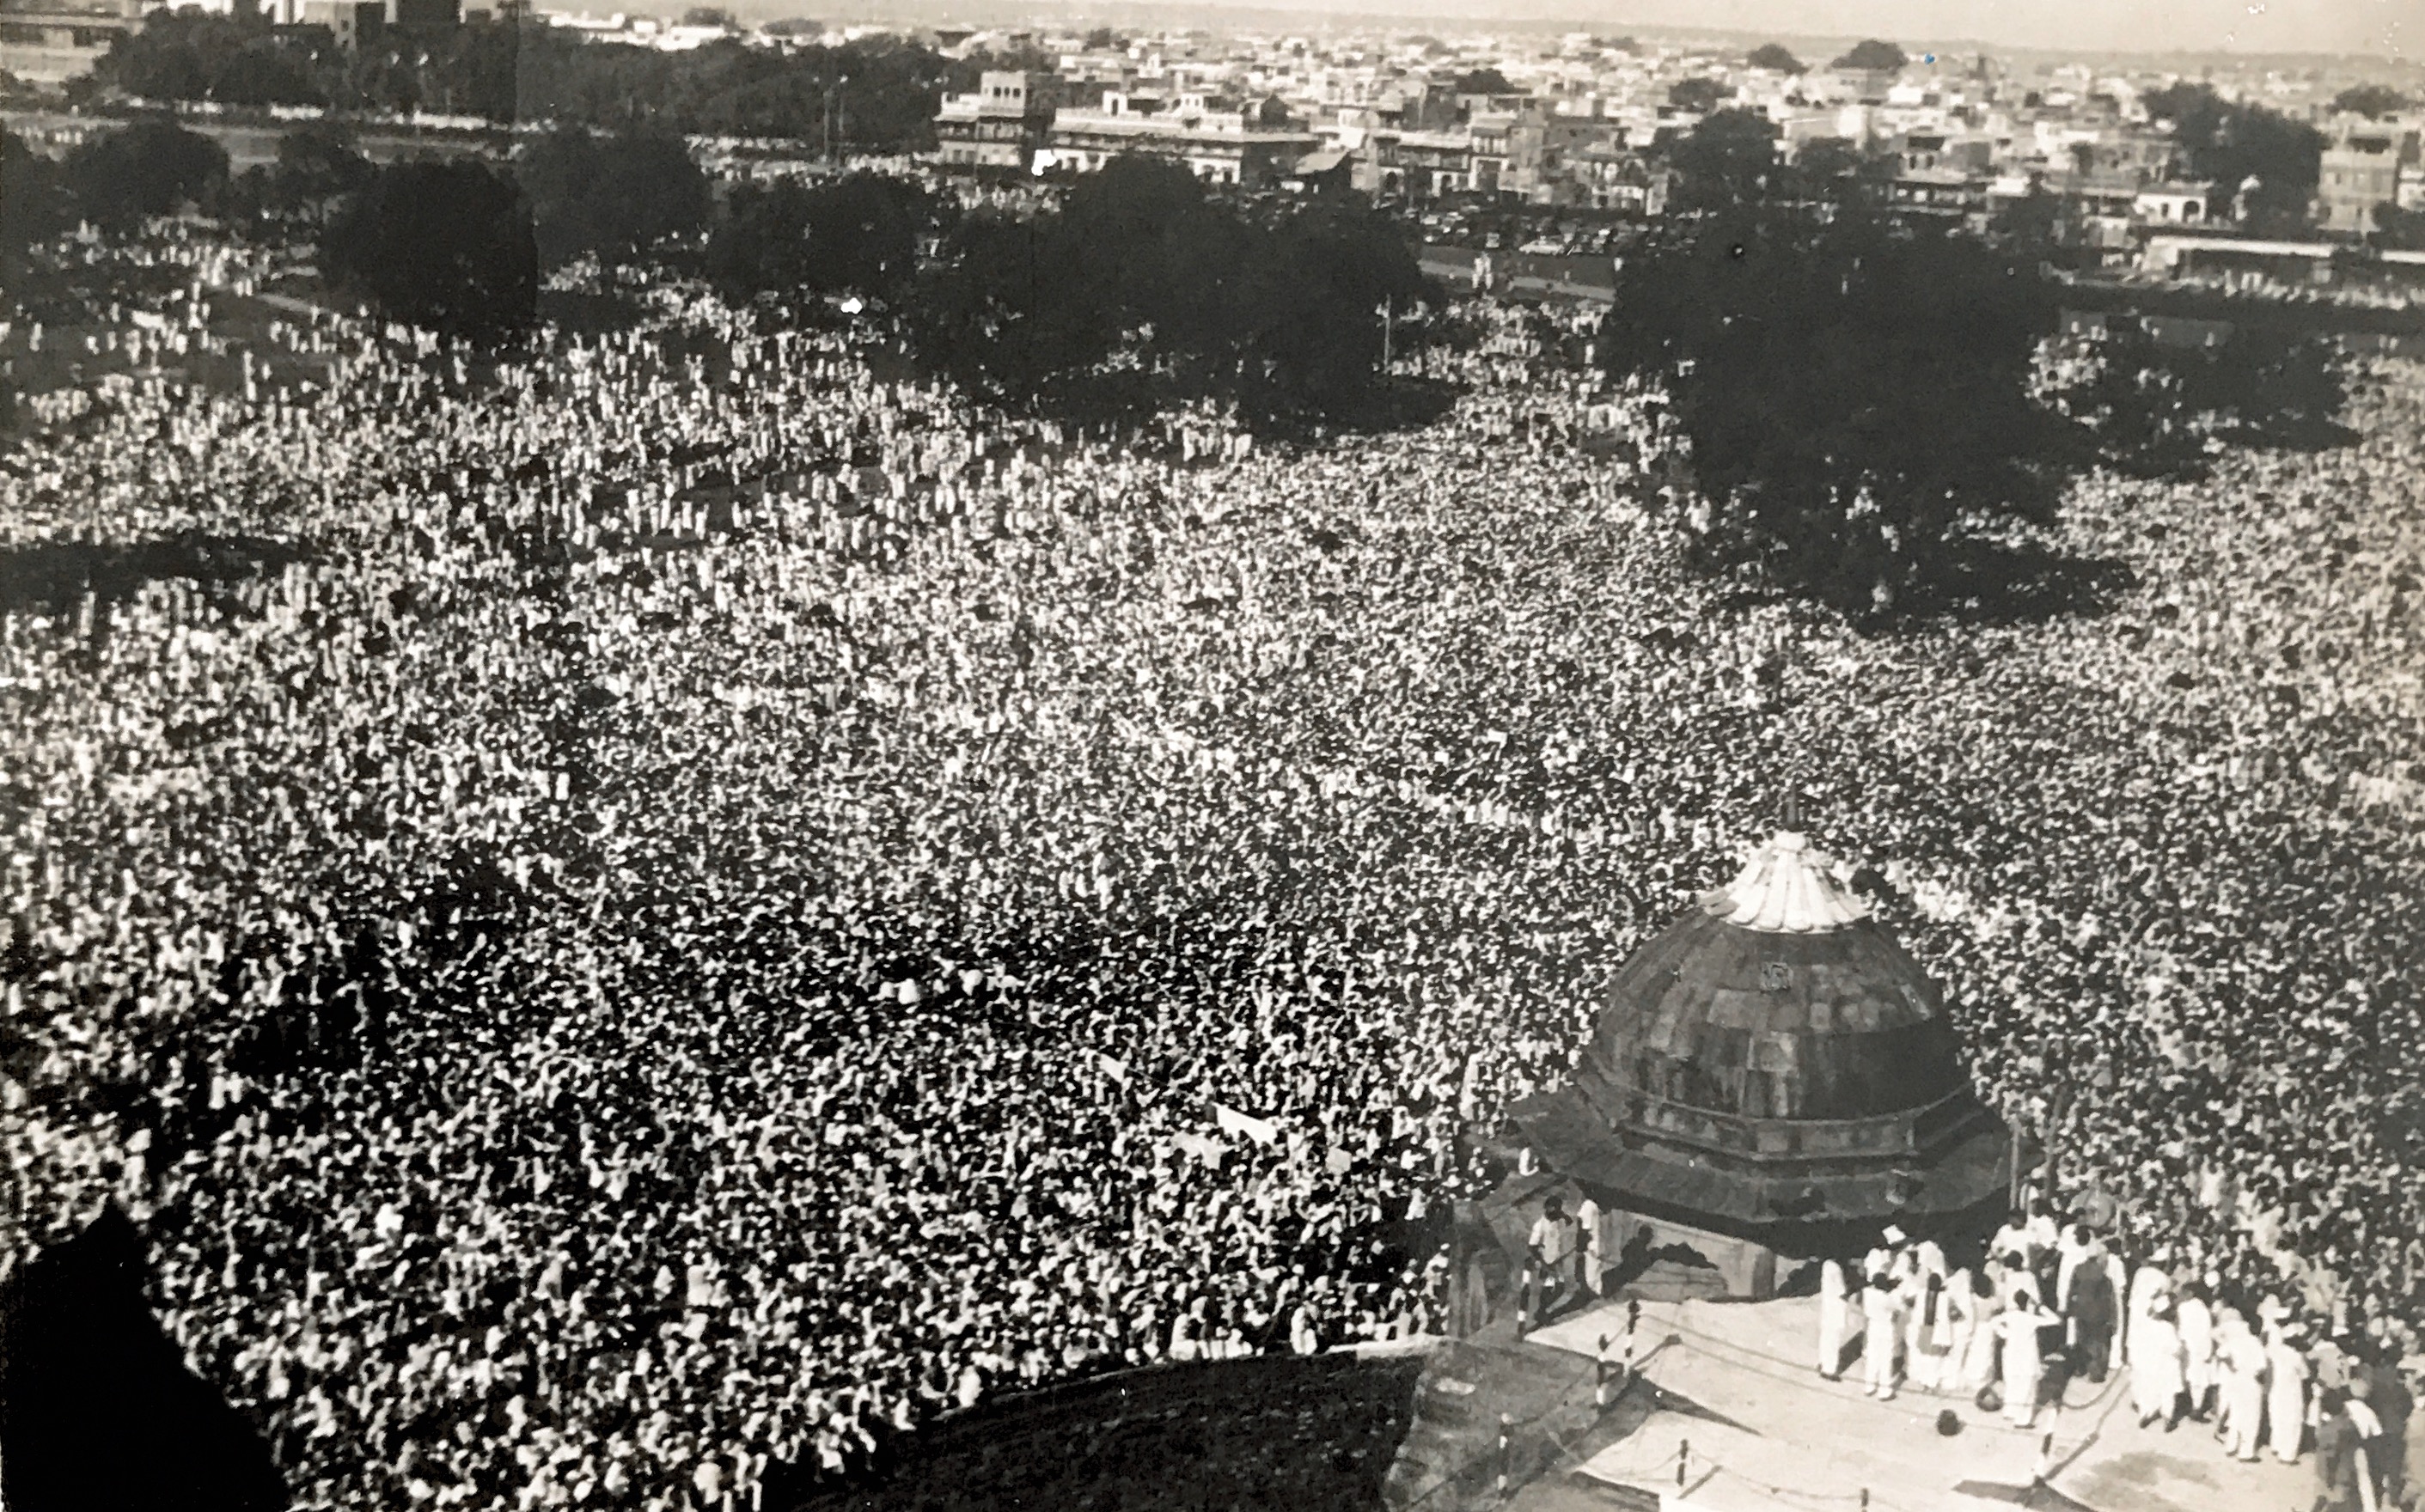 Flag Hoisting ceremony at the Red Fort on the morning of 16 August 1947. A view of the crowd that had assembled to witness the ceremony. Flag on the Red Fort was hoisted under arrangements of 1 SIKH on a given signal (electric bell) by the Prime Minister Shri Jawaharlal Nehru. This picture was taken by self sitting in the Northern Capula on the main gate facing Chandni Chowk on the 16th August morning.